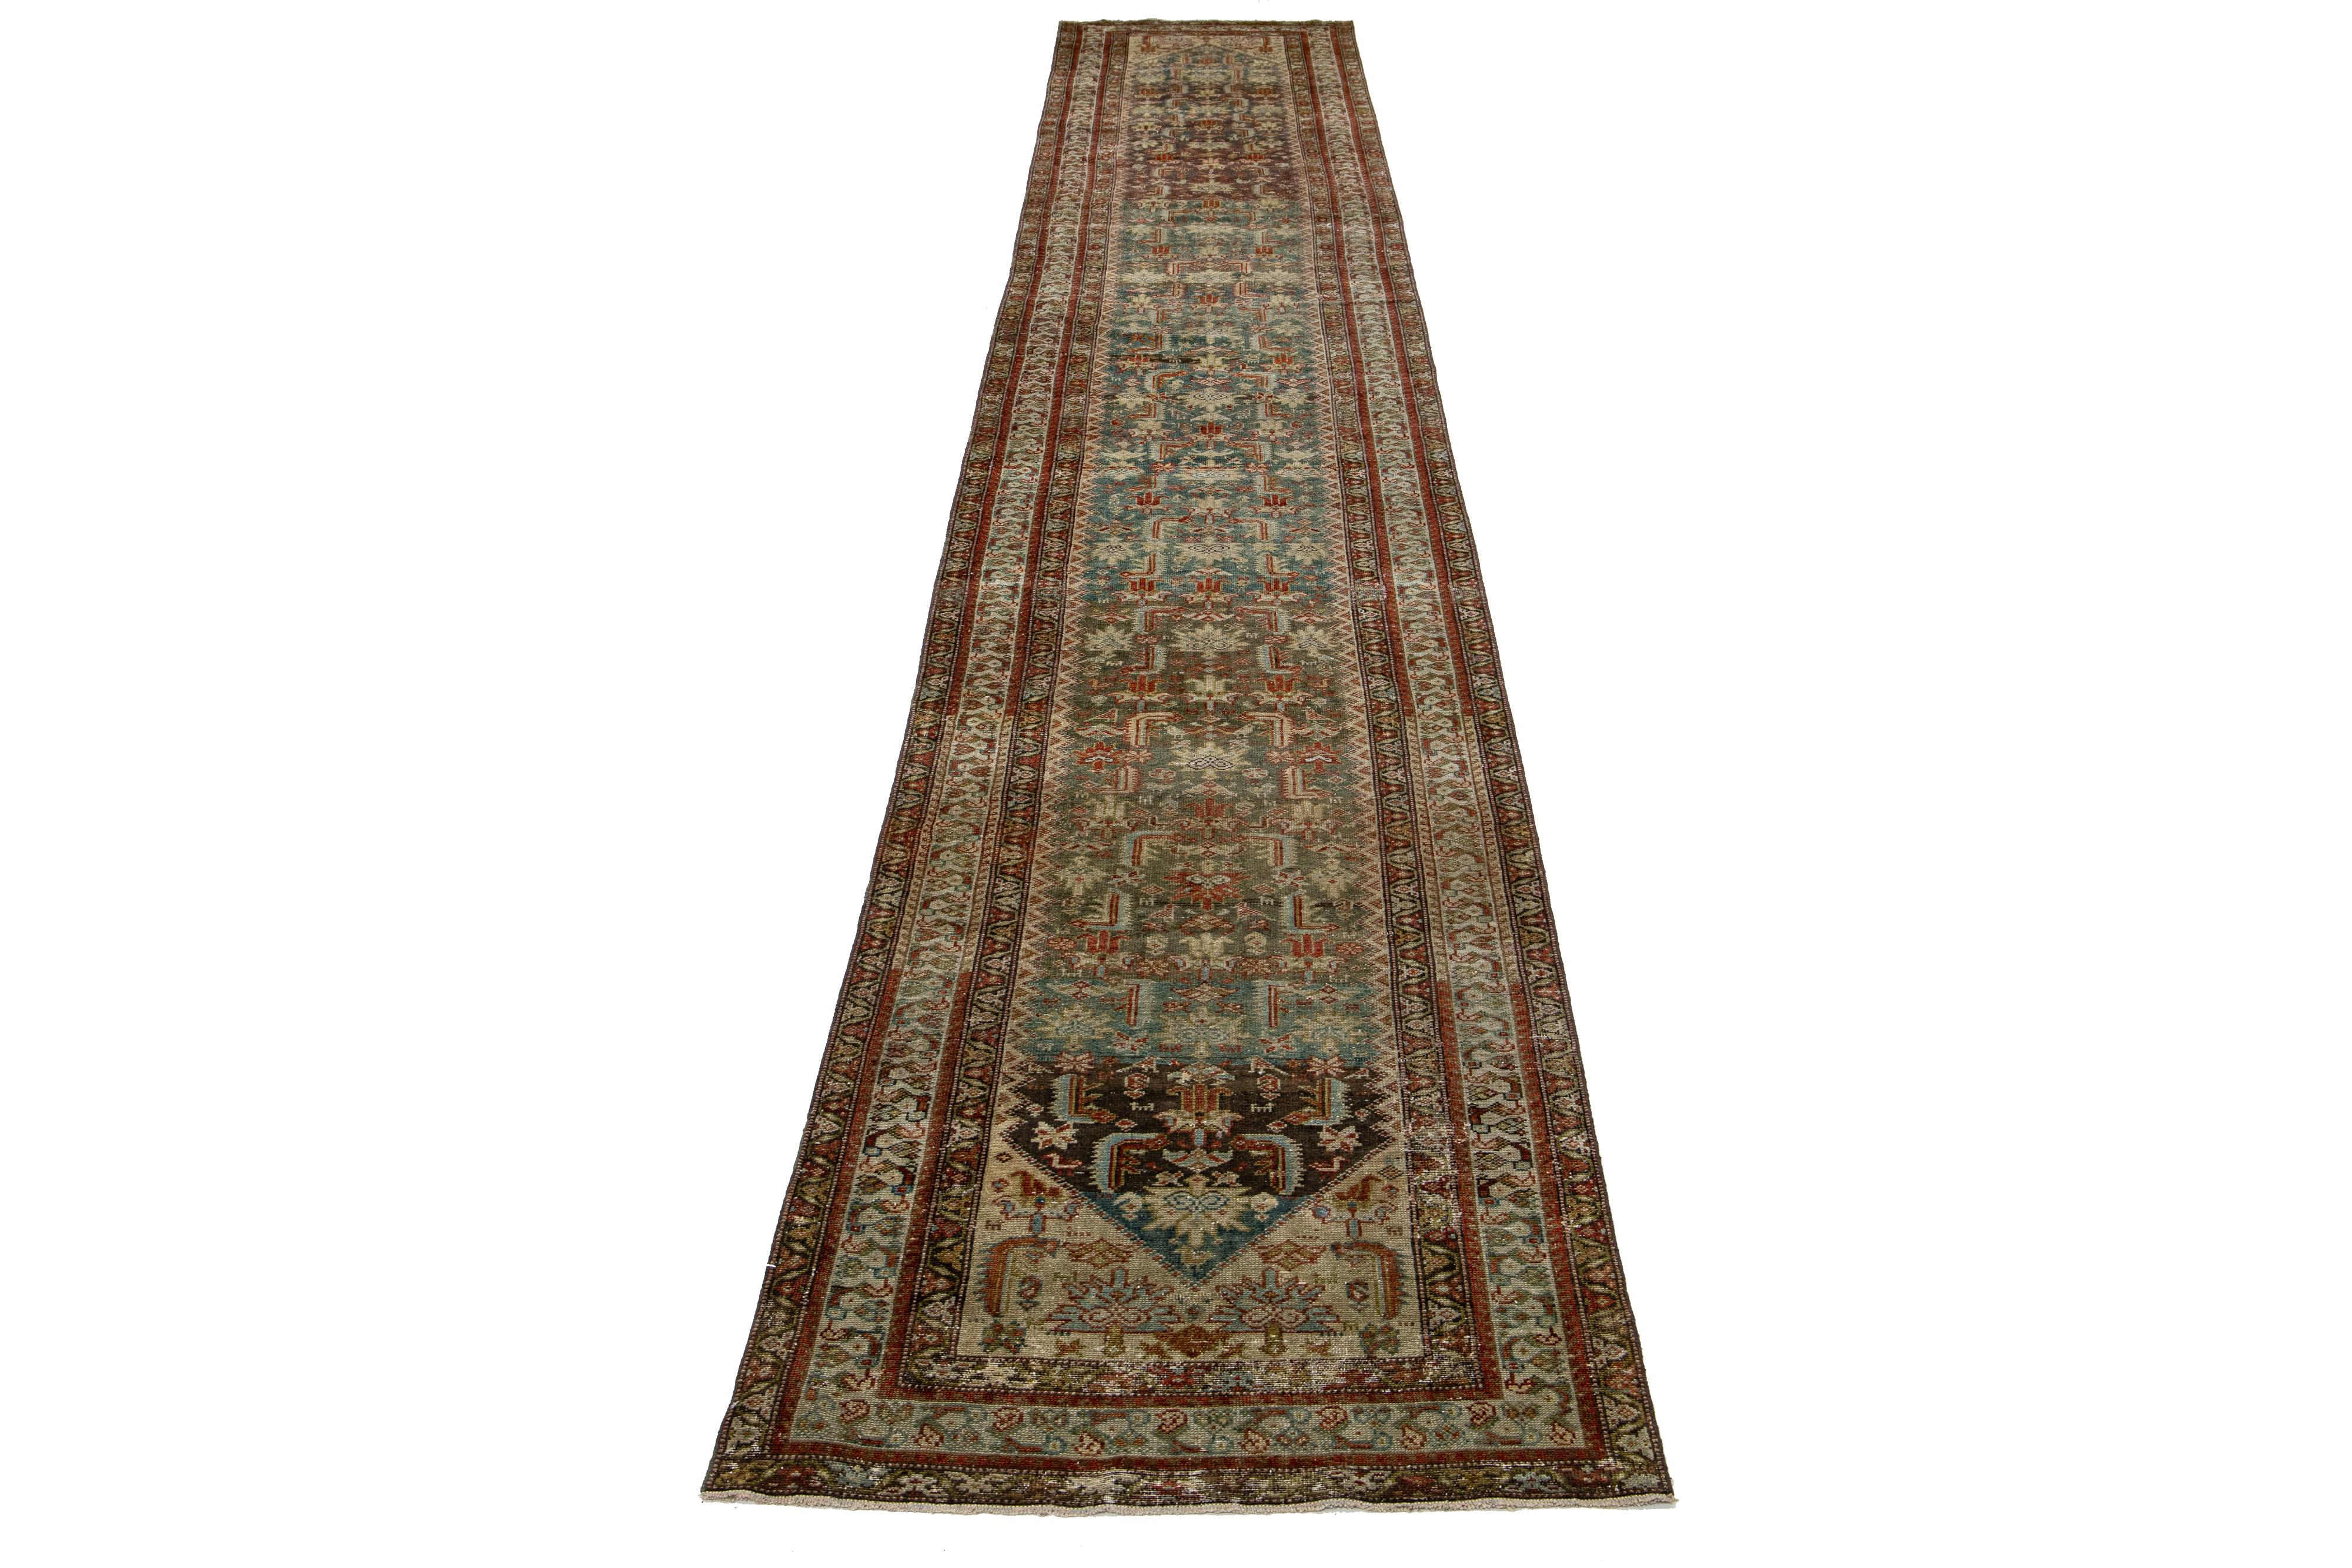 The Persian Malayer wool rug exudes an antique elegance with its hand-knotted wool construction. Its blue field is beautifully decorated with a floral pattern highlighted by rust, brown, and golden accents.

This rug measures 3'2